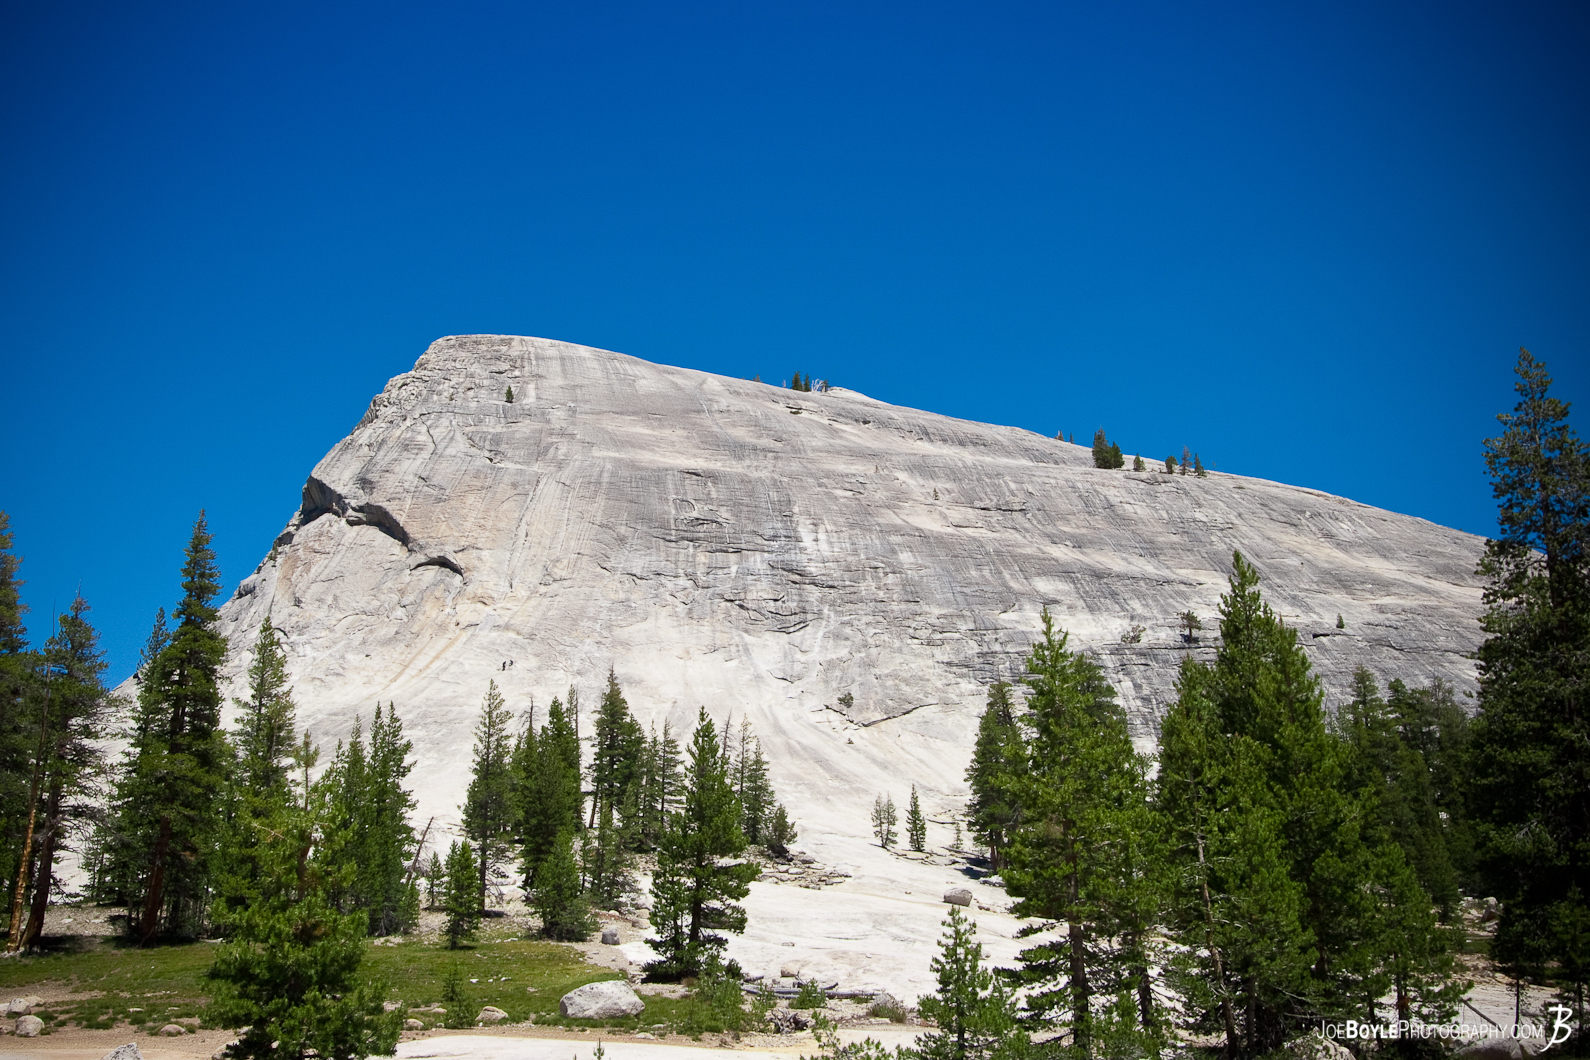  Lember Dome is a fun day hike in Yosemite National Park. Just a bit down the road is Tuolumne Meadows Store and Visitor Center. Talking from a backpacker's perspective, the store was a gold mine! It was great to eat something other than oatmeal and Cliff bars, plus it was a great place to talk to hikers from all over the world! 